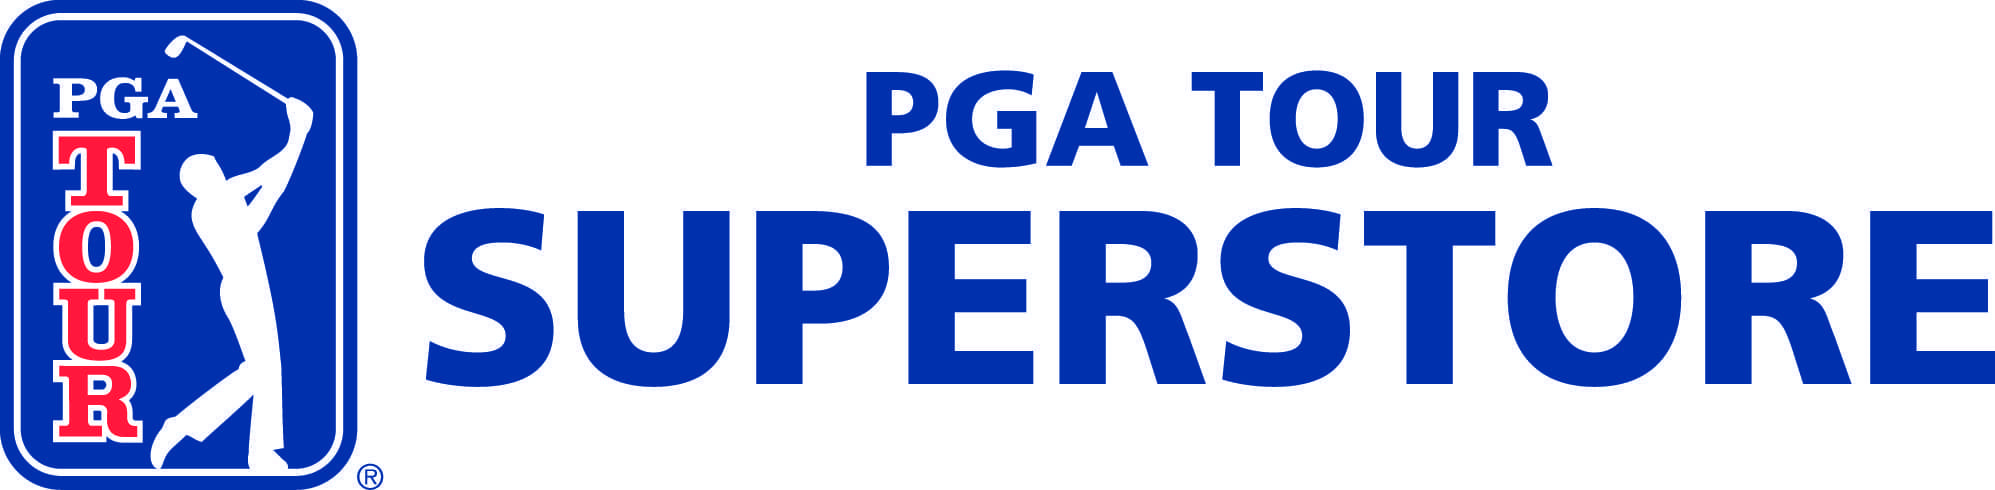 Superstore Logo - Buy Golf Clubs and Golf Equipment Online | PGA TOUR Superstore